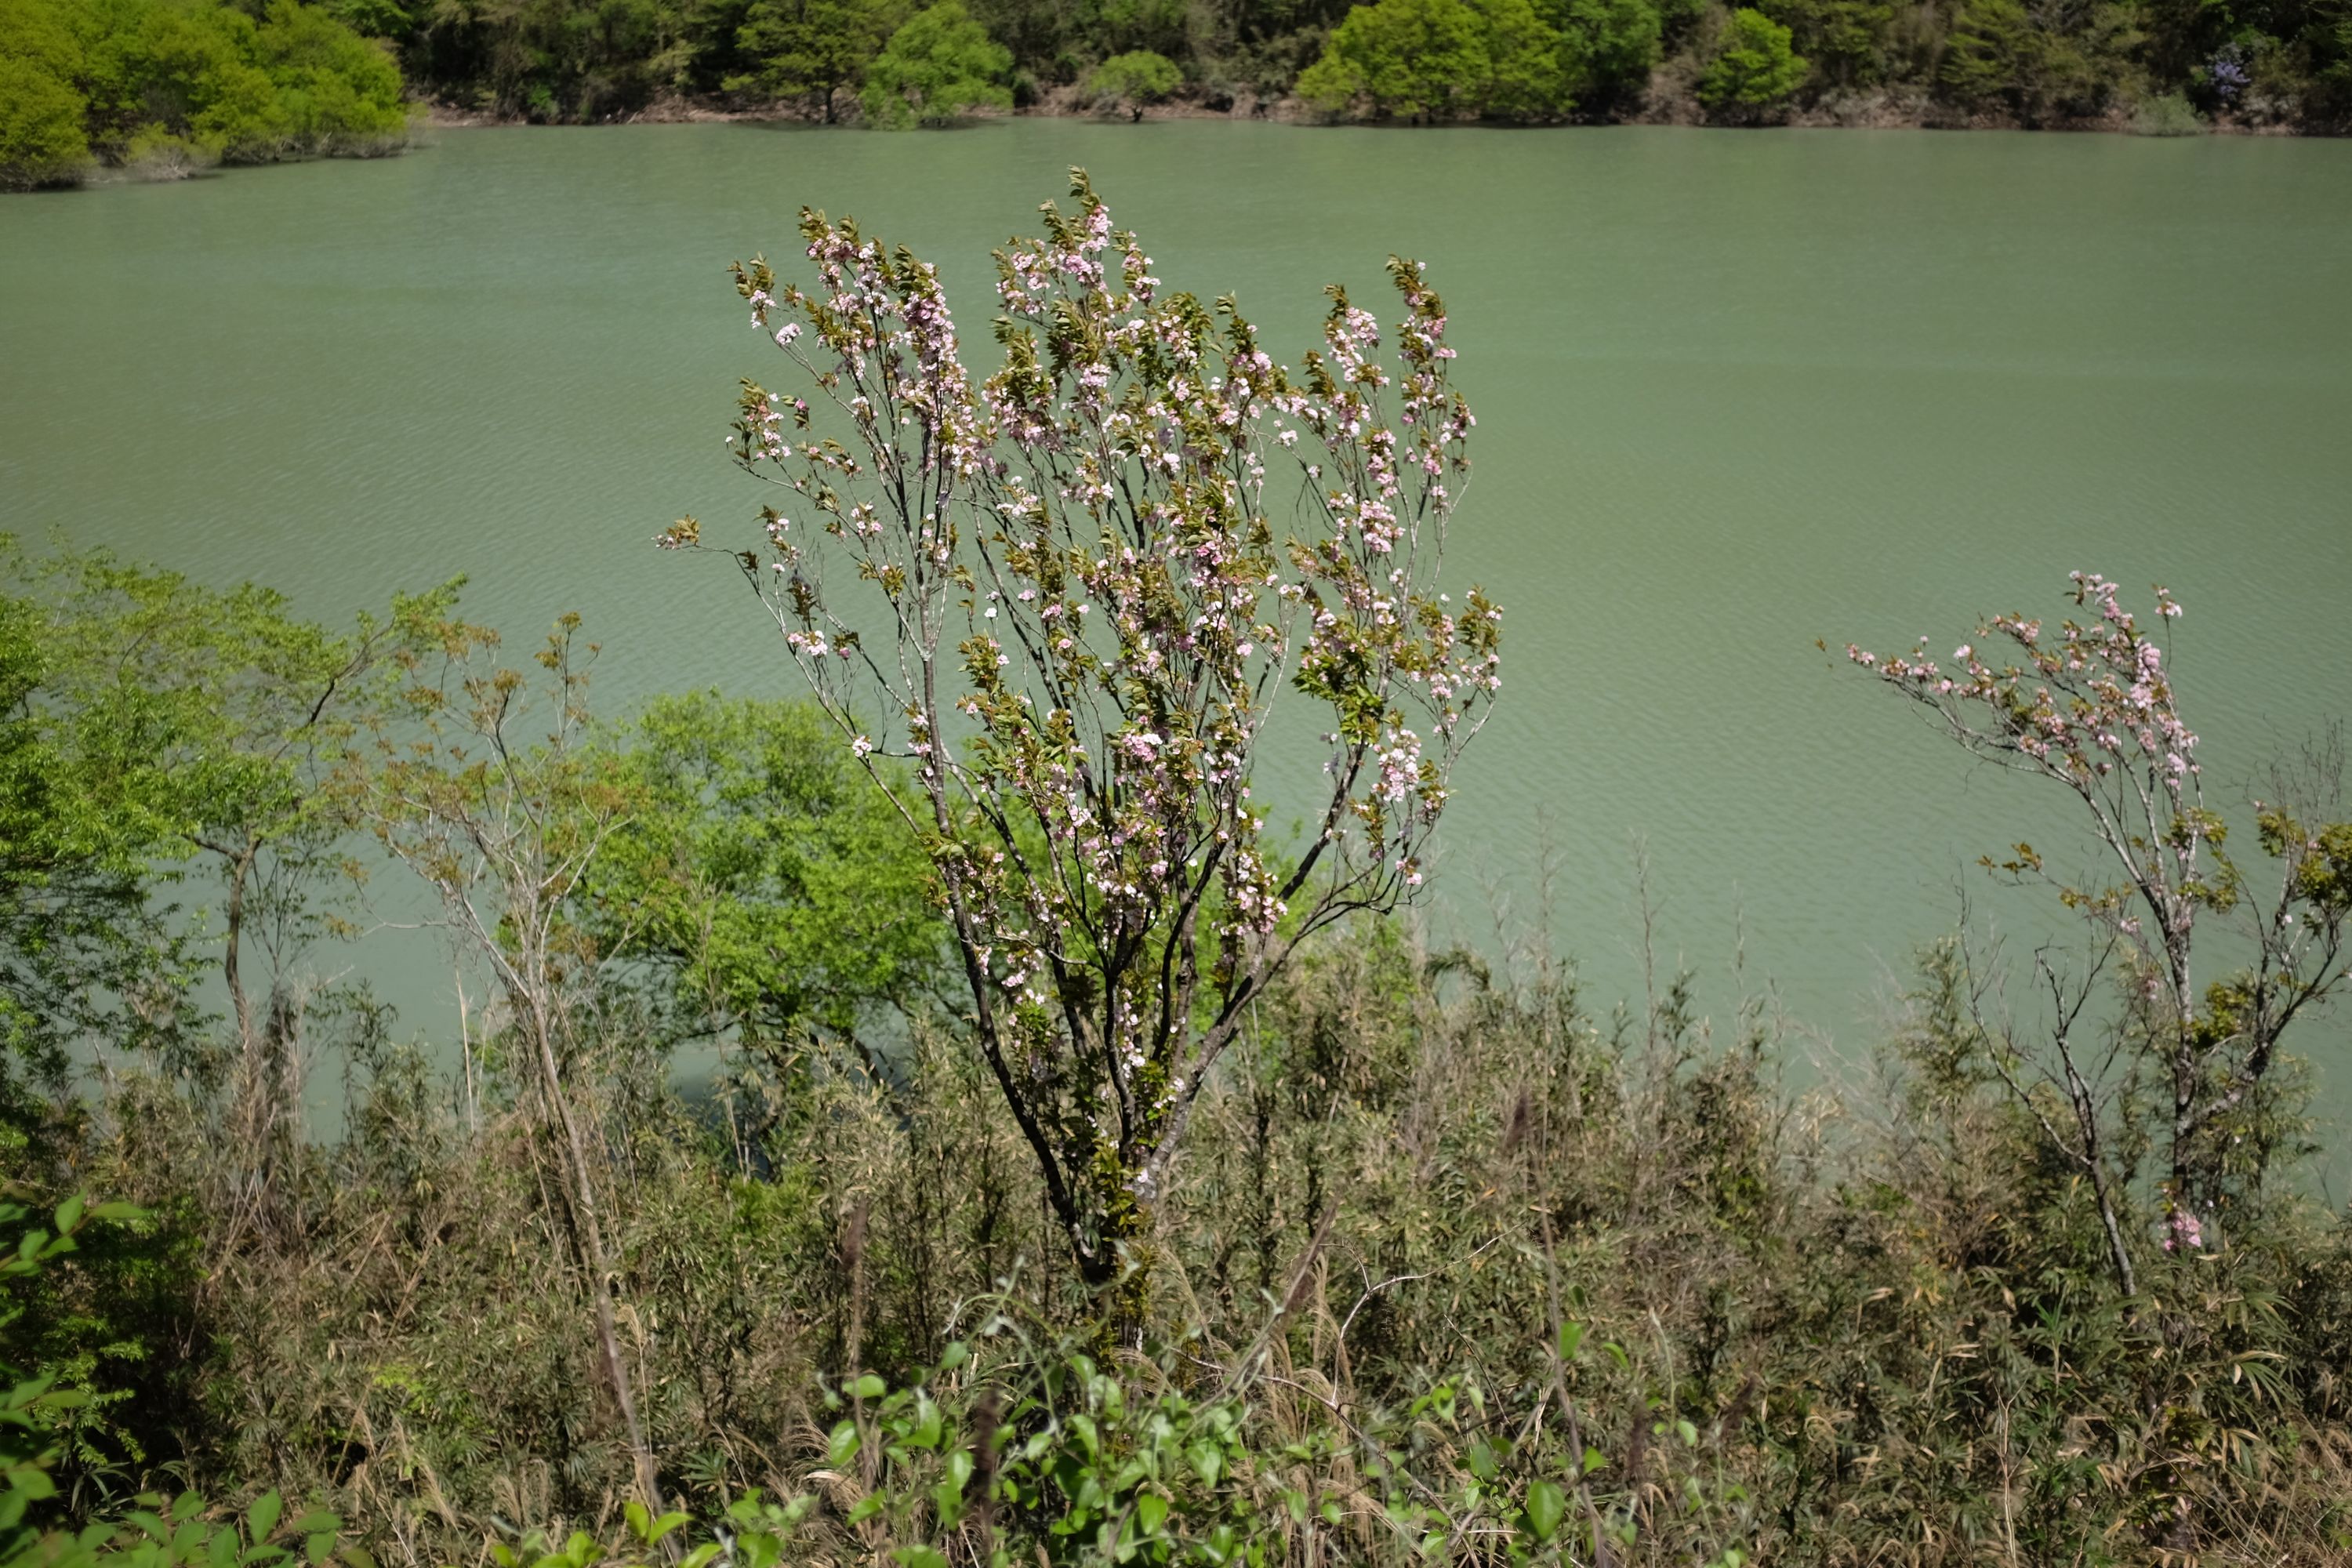 A flowering mountain cherry by the green waters of a lake.